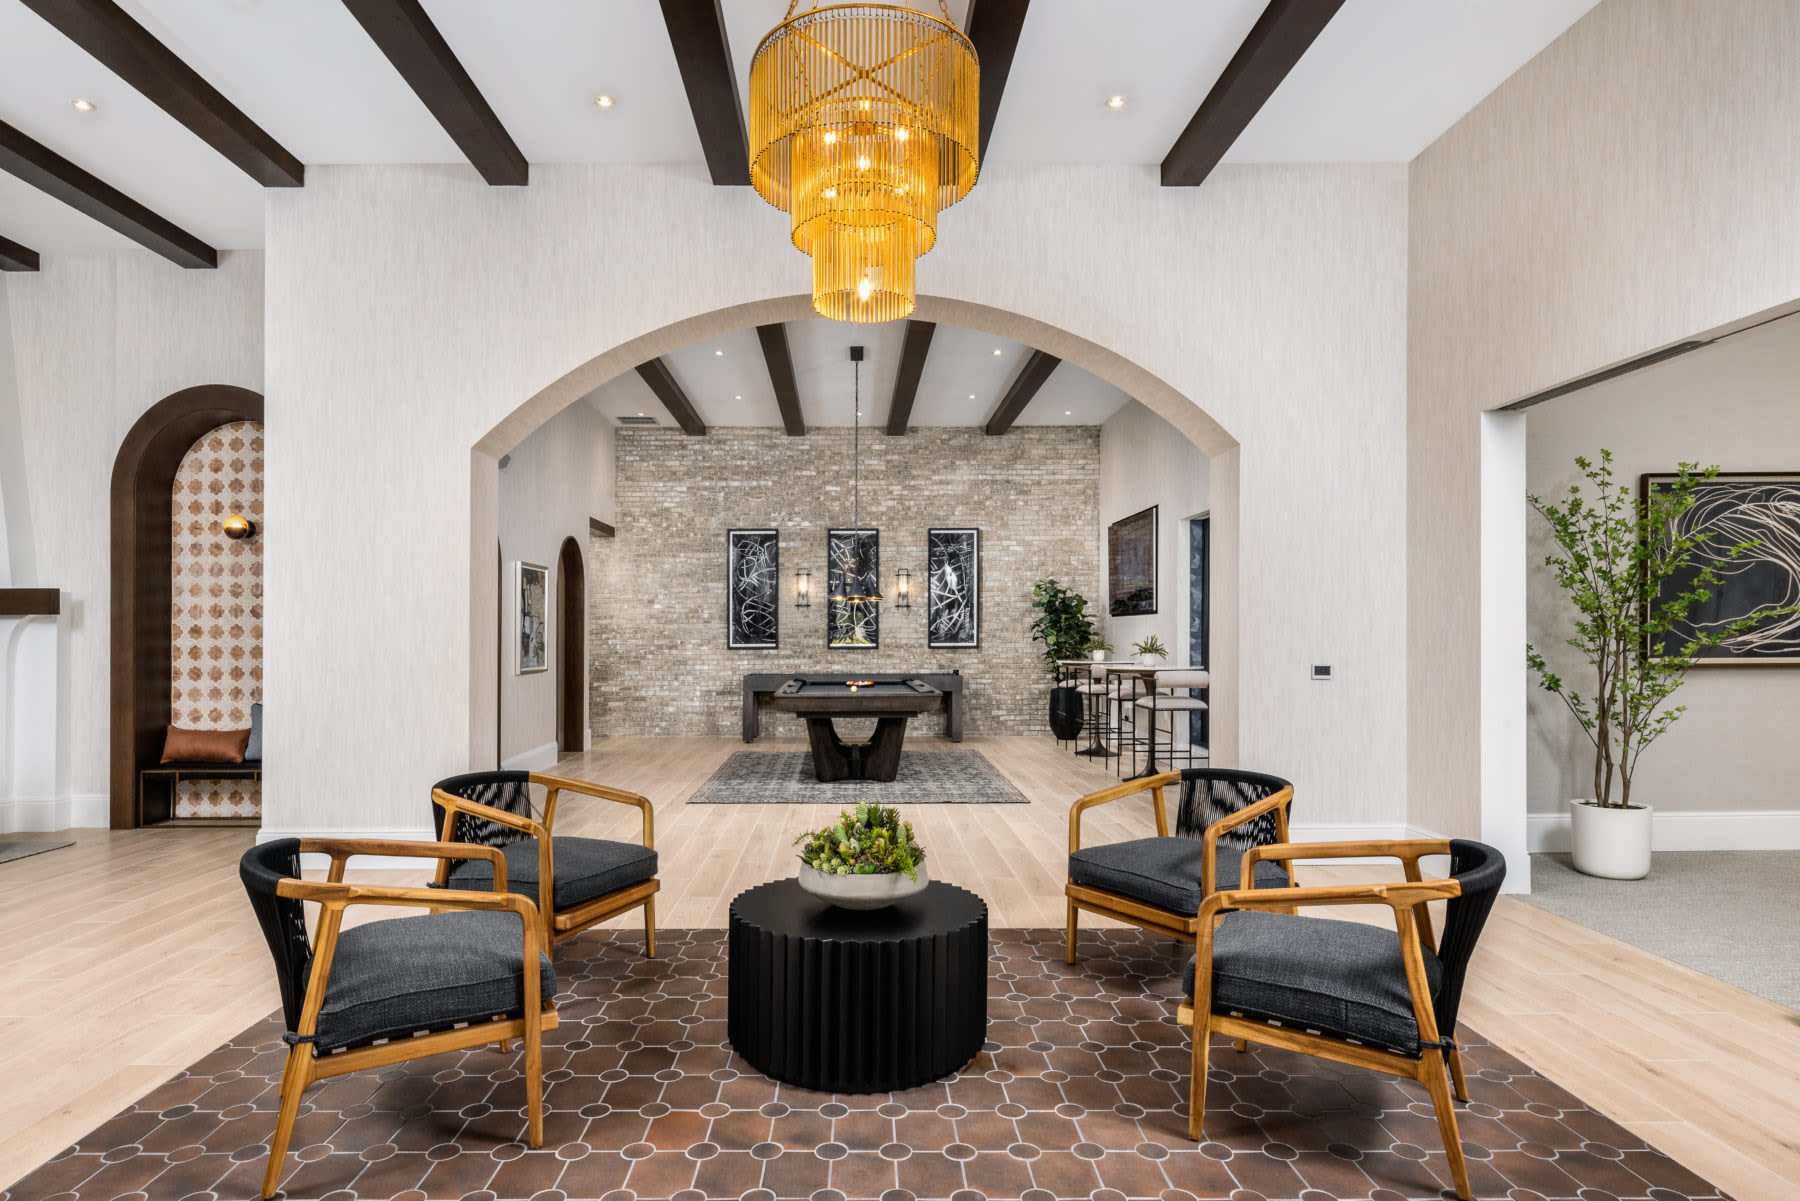 Experience the inviting atmosphere of a furnished clubhouse adorned with natural light, modern furnishings, and stylish wood-style flooring at Locklyn West Palm in West Palm Beach, Florida